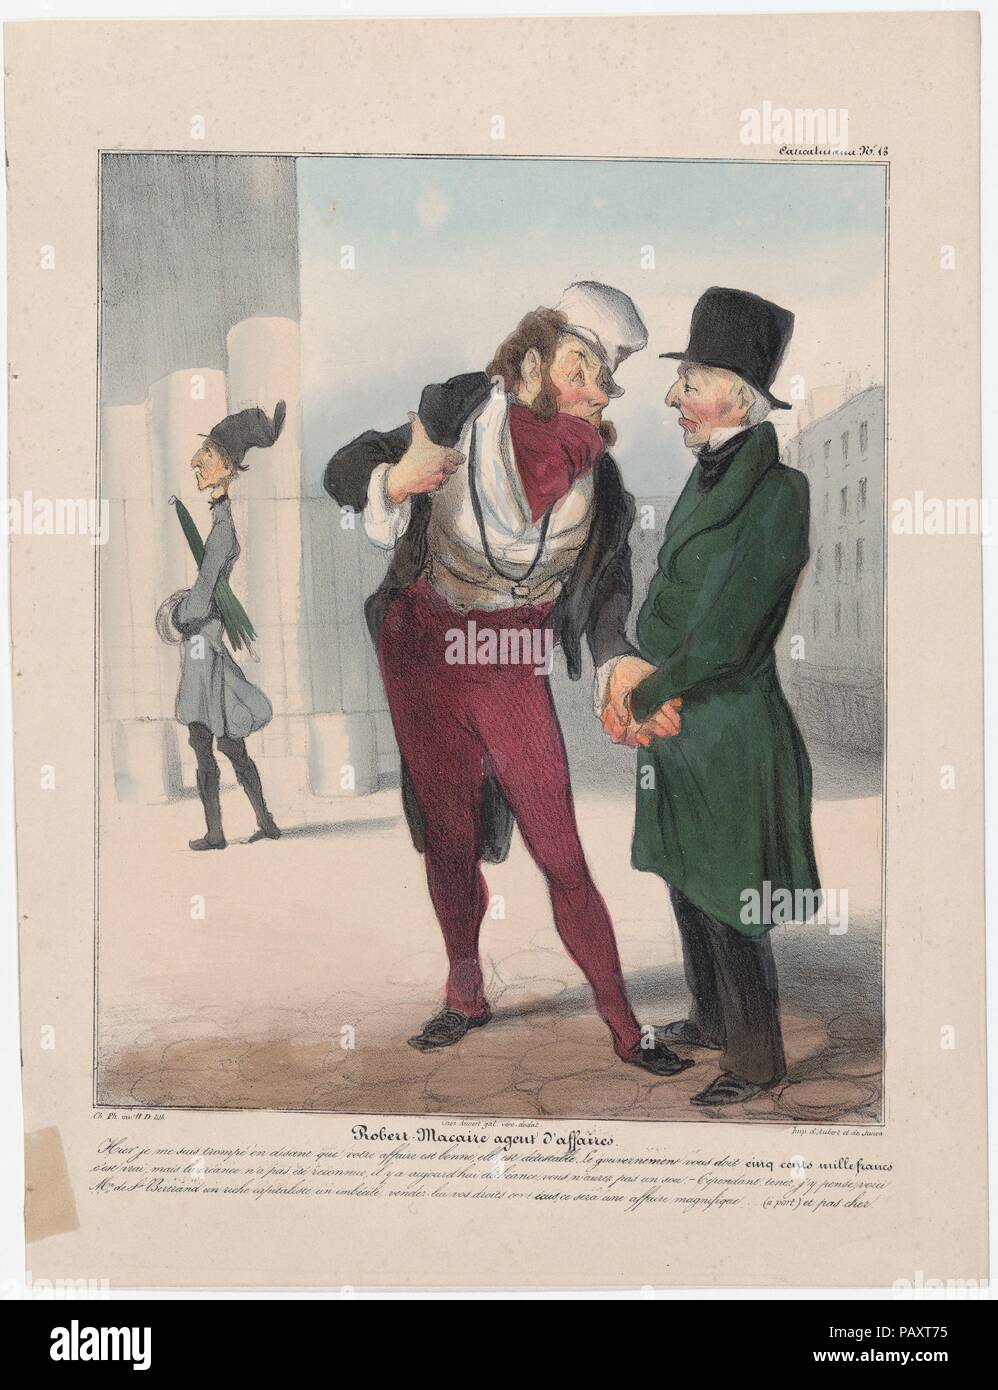 Plate 13: Robert Macaire, business agent, from 'Caricaturana,' published in Les Robert Macaires. Artist: Honoré Daumier (French, Marseilles 1808-1879 Valmondois). Author: Charles Philipon (French, Lyons 1800-1862 Paris). Dimensions: Image: 10 1/16 × 8 1/4 in. (25.6 × 21 cm)  Sheet: 13 7/16 × 10 3/16 in. (34.1 × 25.8 cm). Printer: Aubert et Cie; Junca. Publisher: Aubert et Cie. Series/Portfolio: 'Caricaturana'. Date: 1838.  Yesterday I made a mistake when I said that your business is in good shape. It's detestable. The government owes you five hundred thousand francs, it's true, but the debt ha Stock Photo